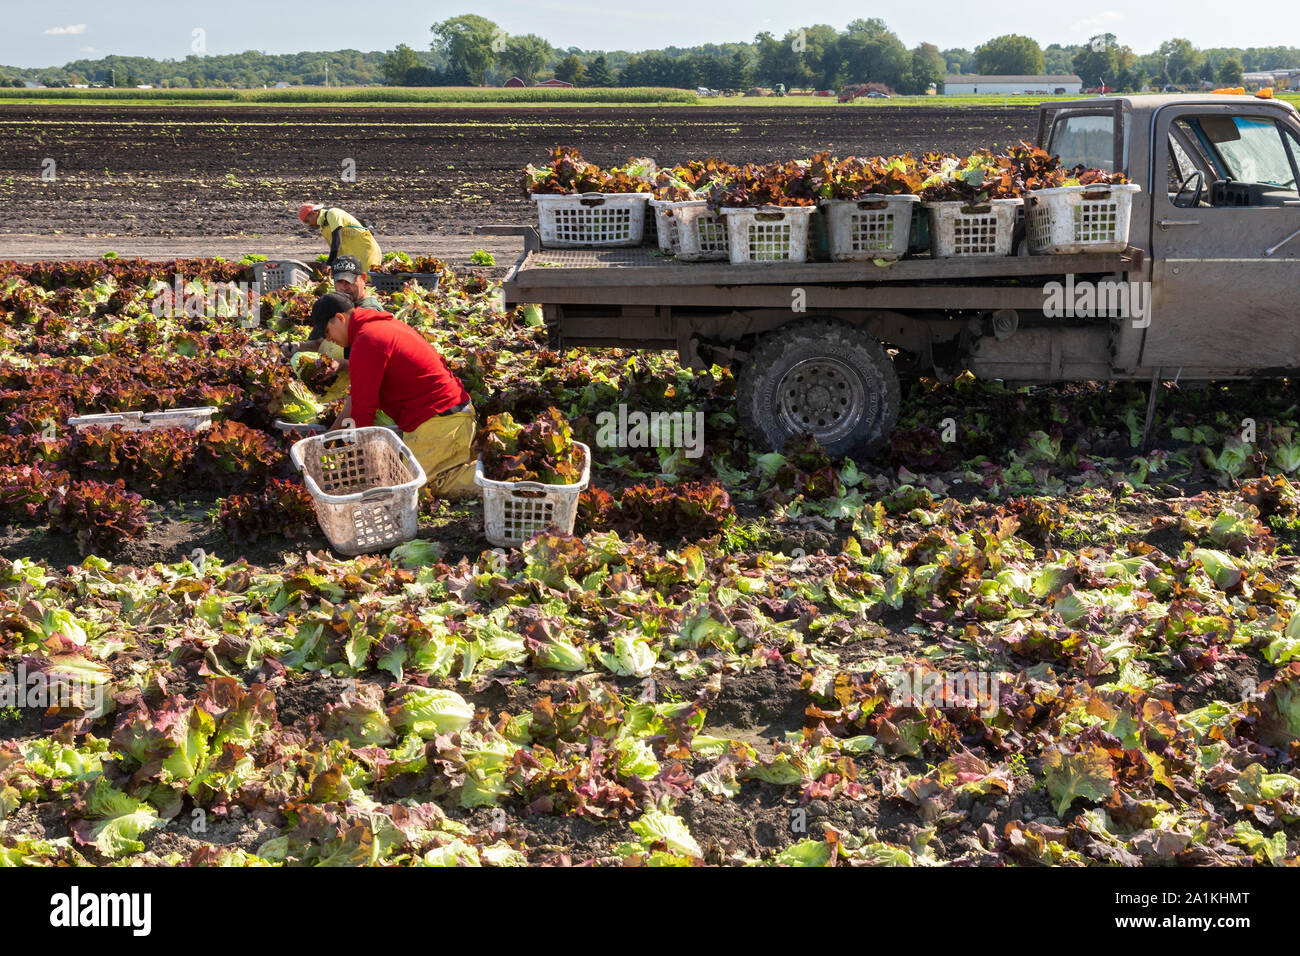 Hudsonville, Michigan - Workers harvest red leaf lettuce from a field in west Michigan. Stock Photo